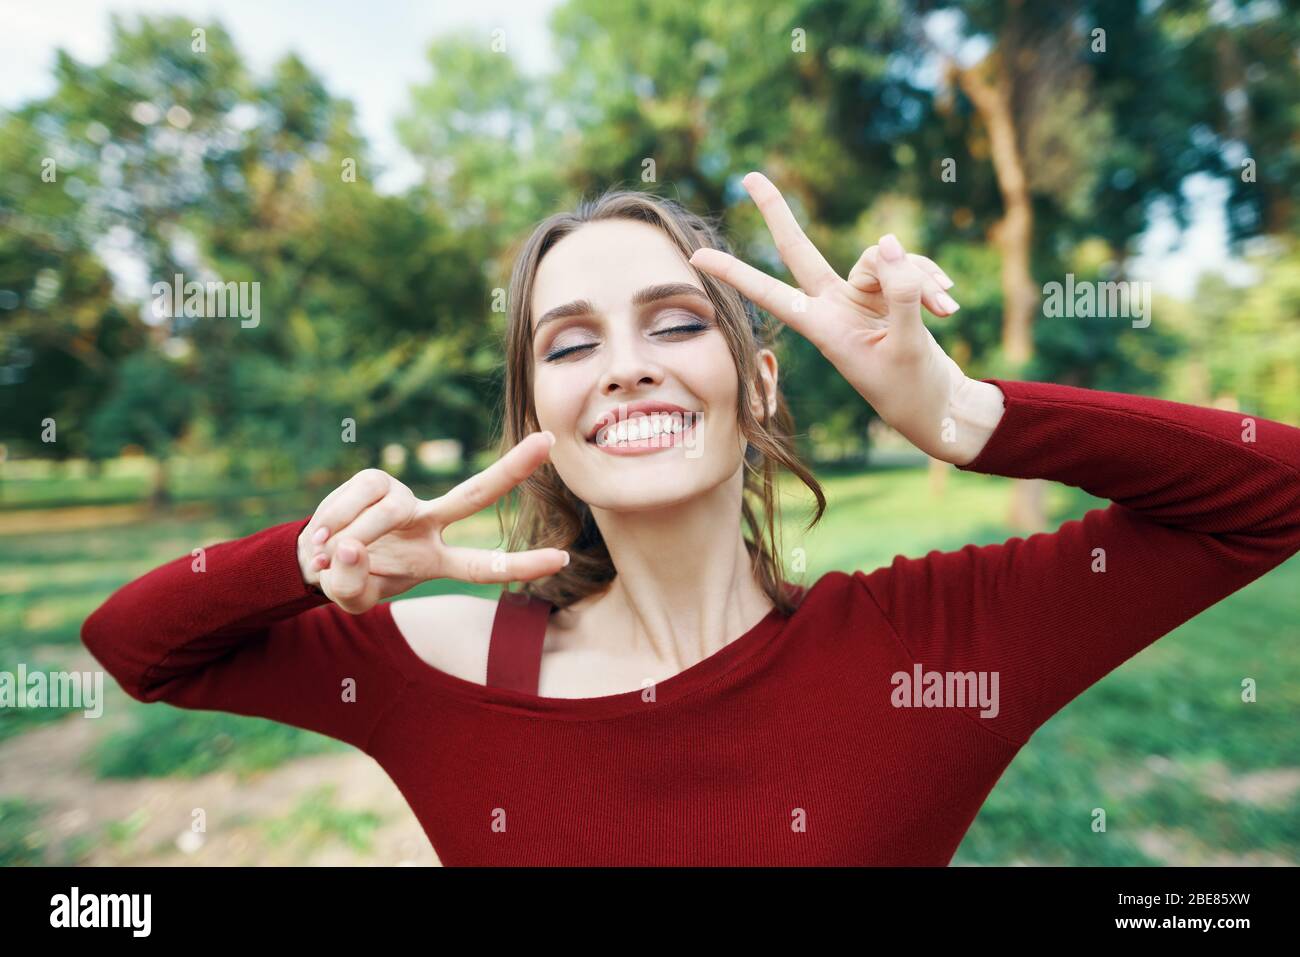 Portrait of a smiling happy woman showing victory sign posing outdoors on green summer nature background. Female beauty concept Stock Photo